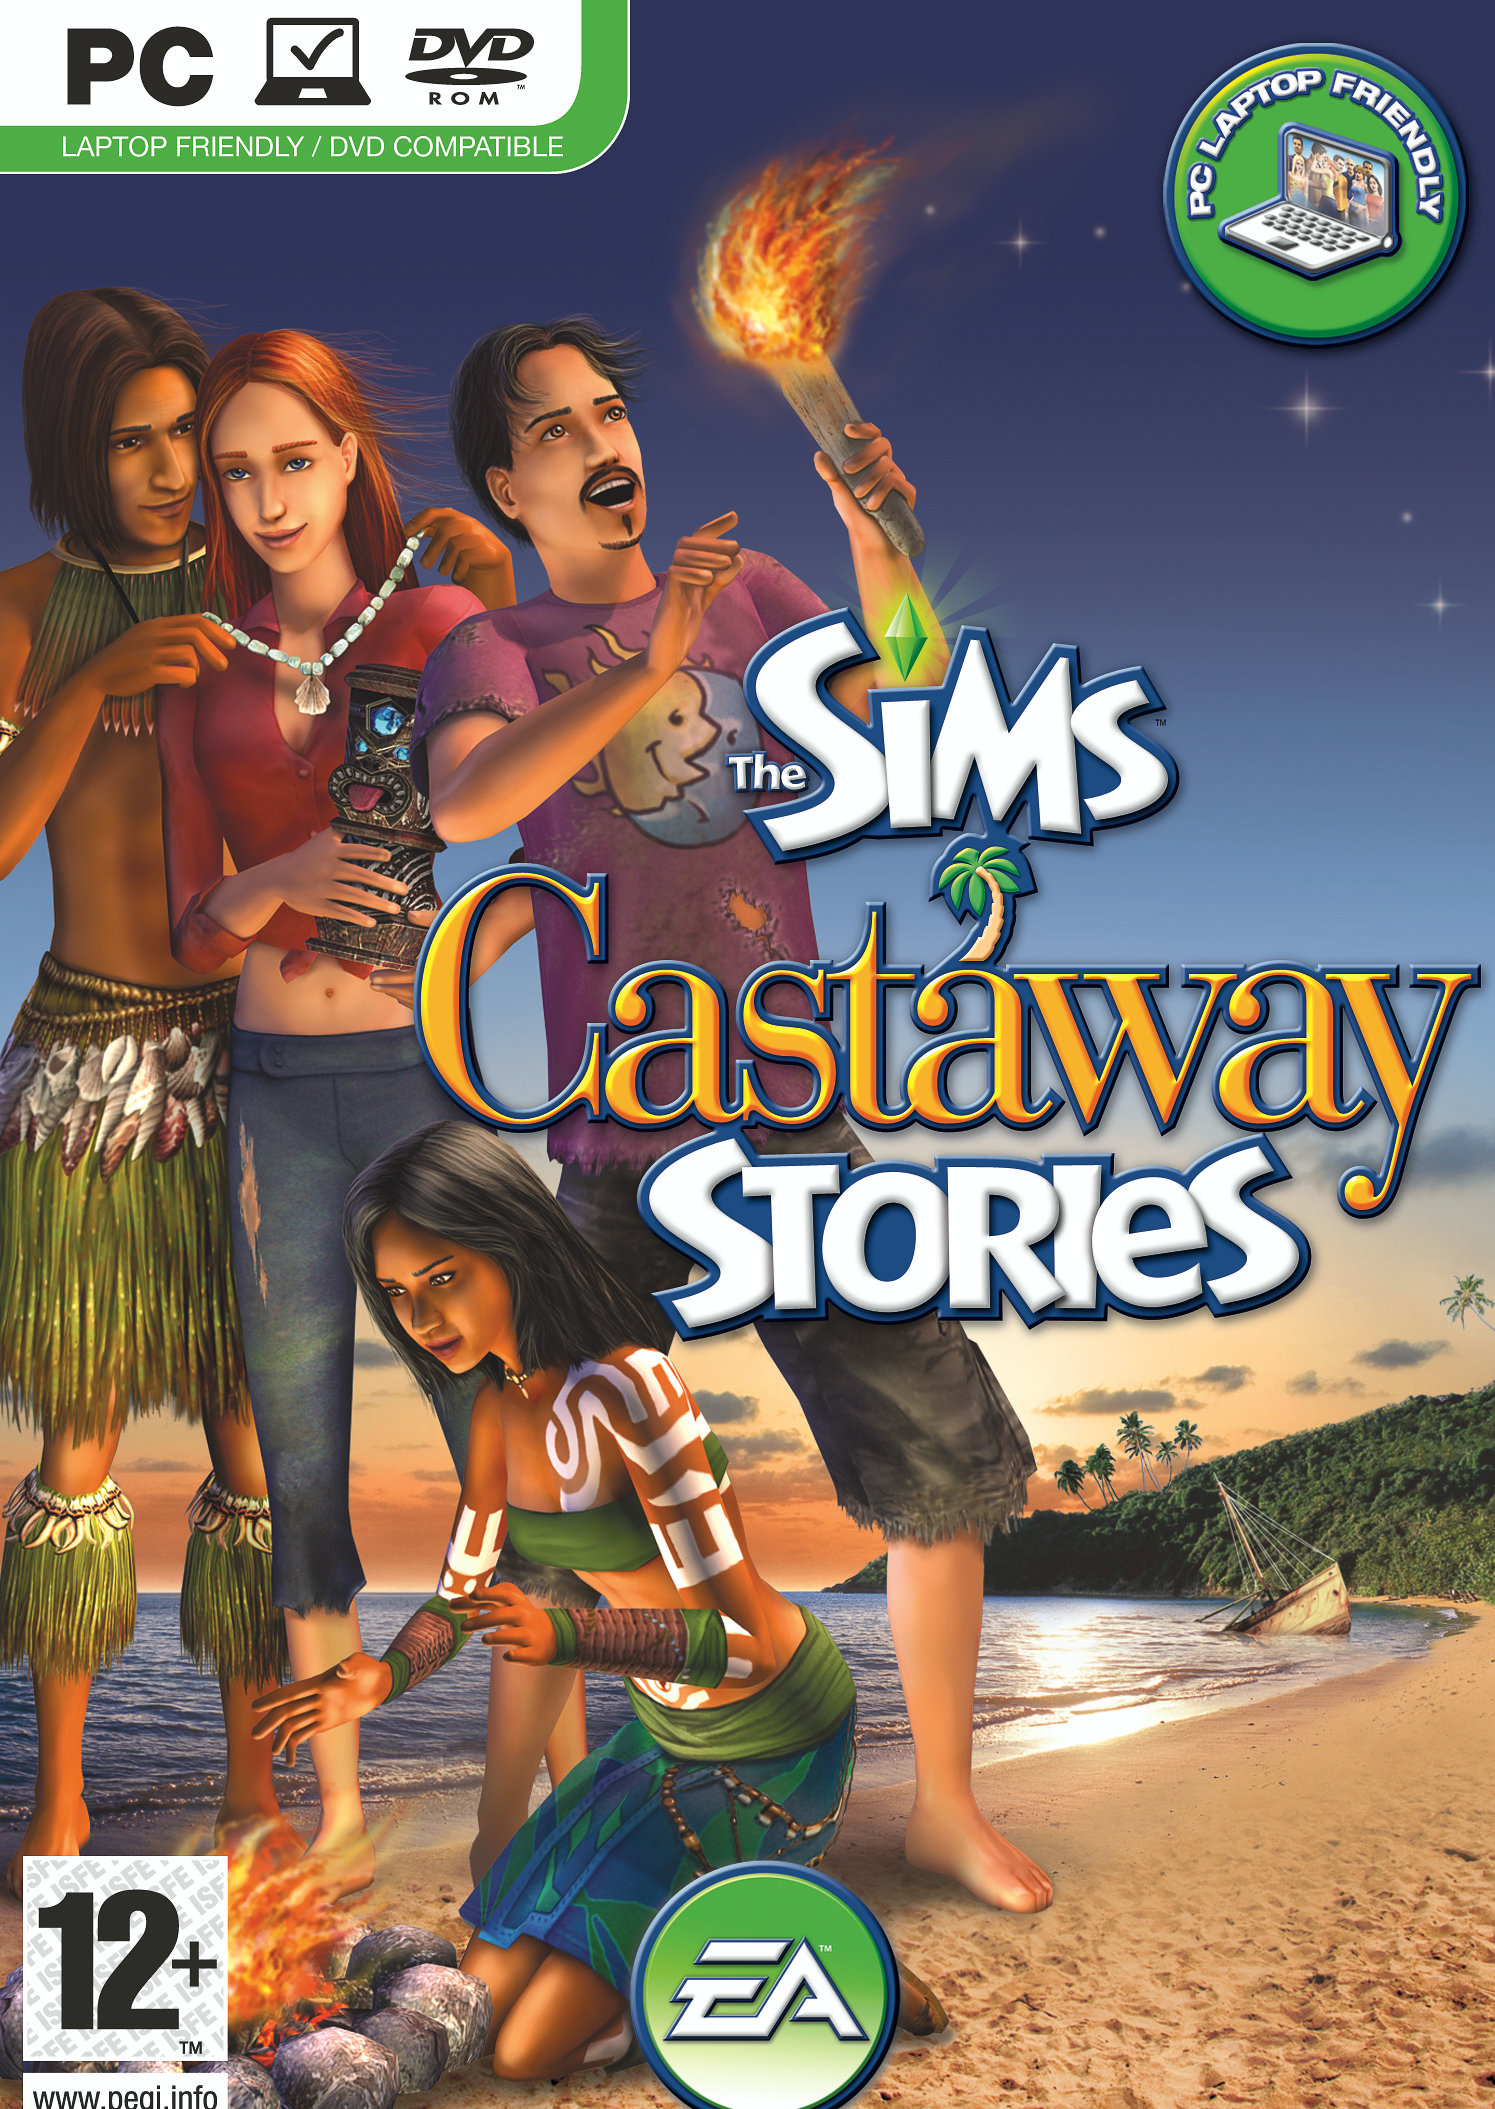 Image of The Sims Castaway Stories